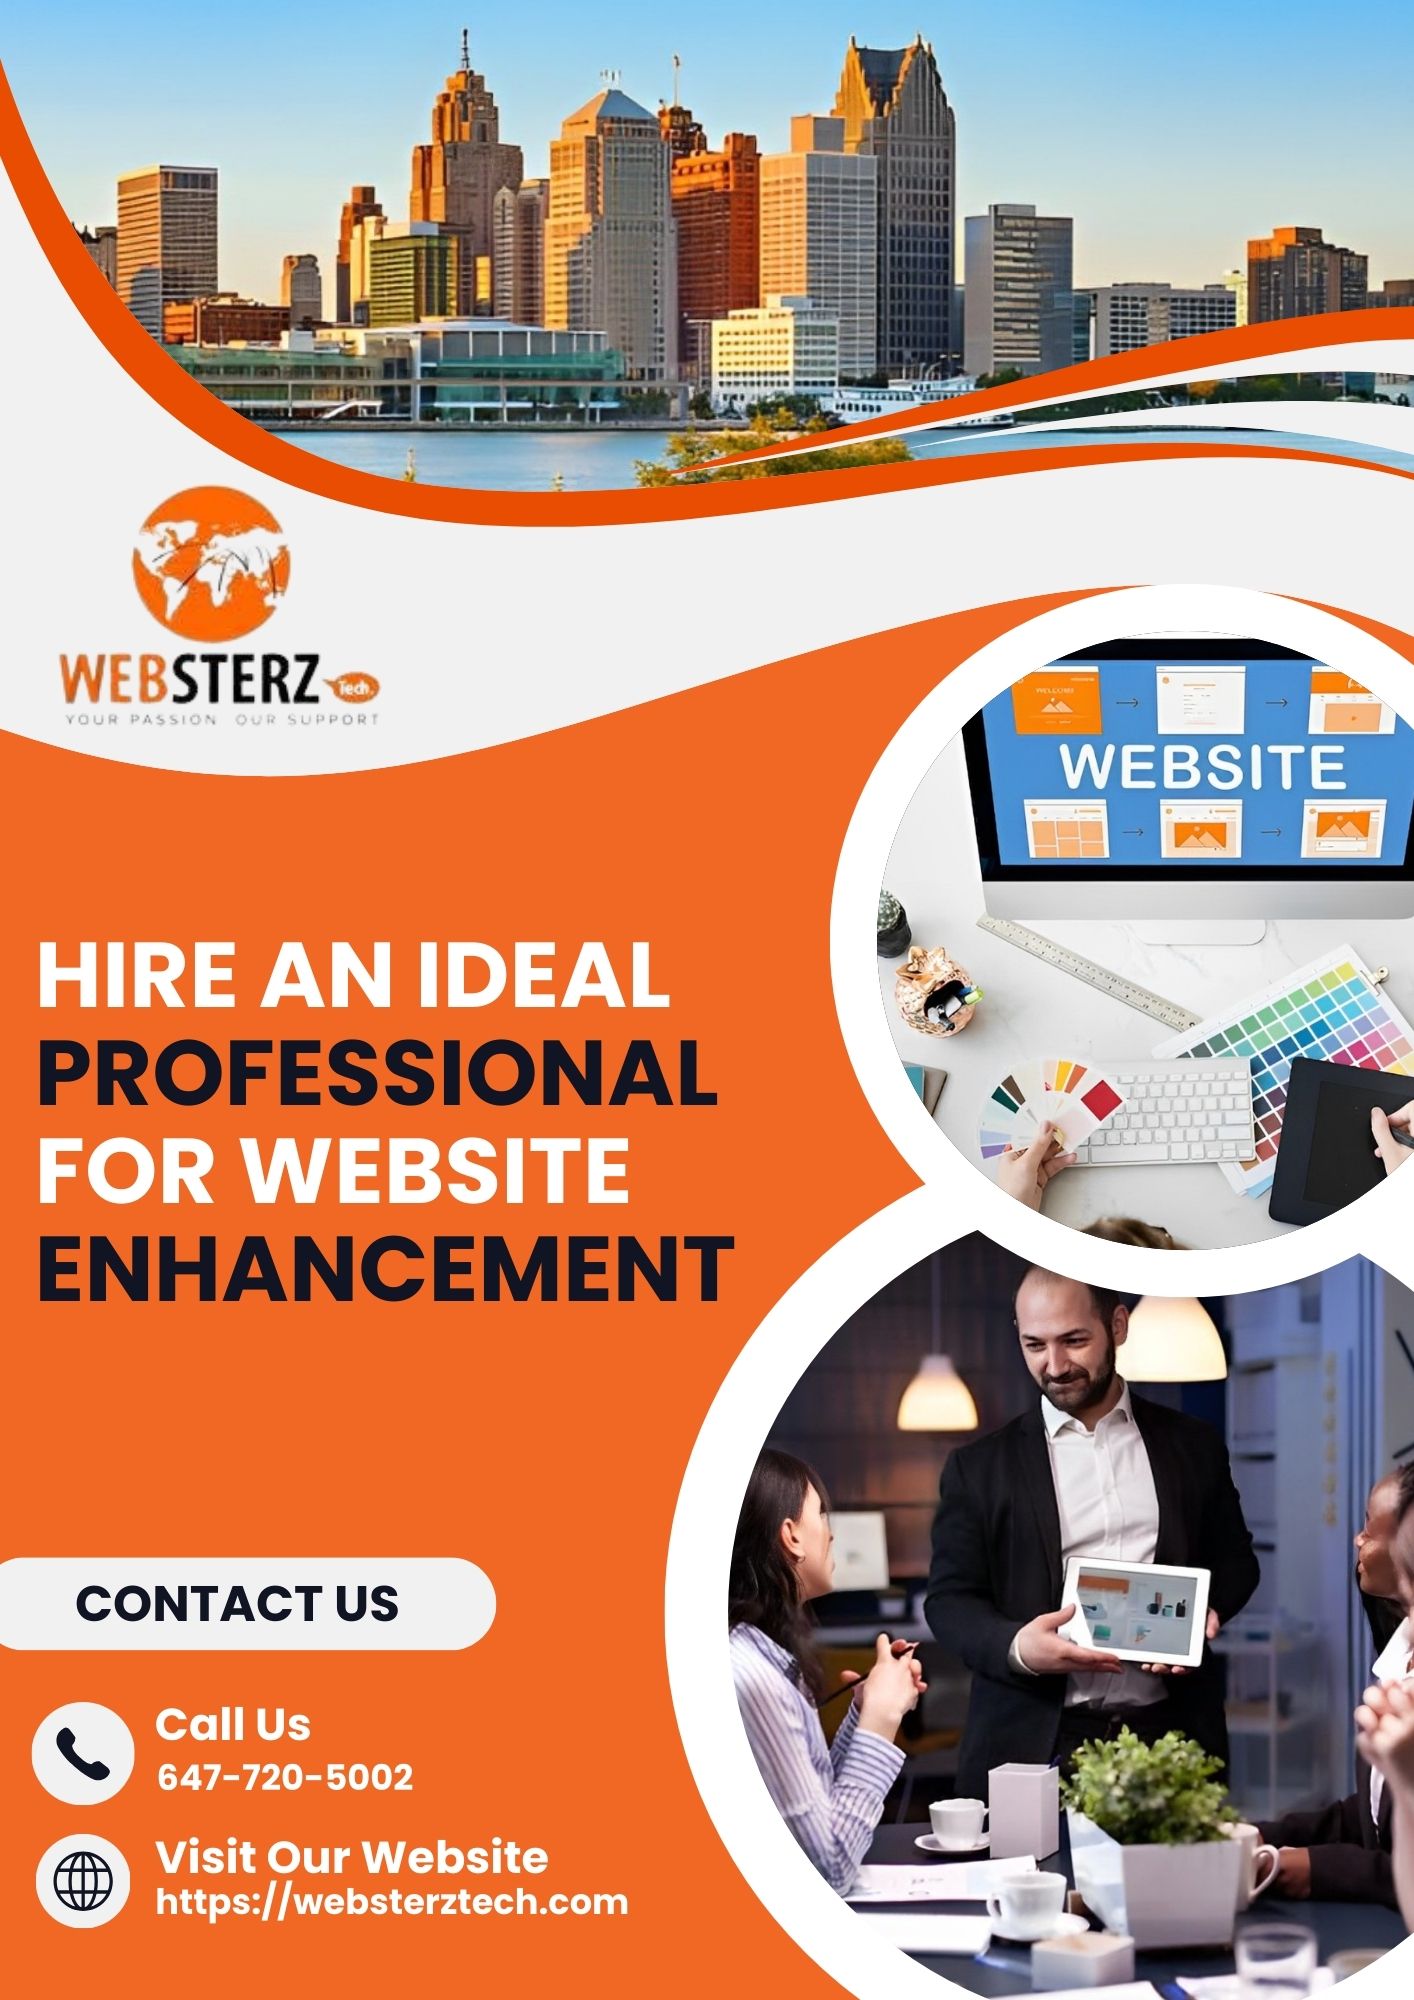 Hire An Ideal Professional For Website Enhancement - Windsor Other